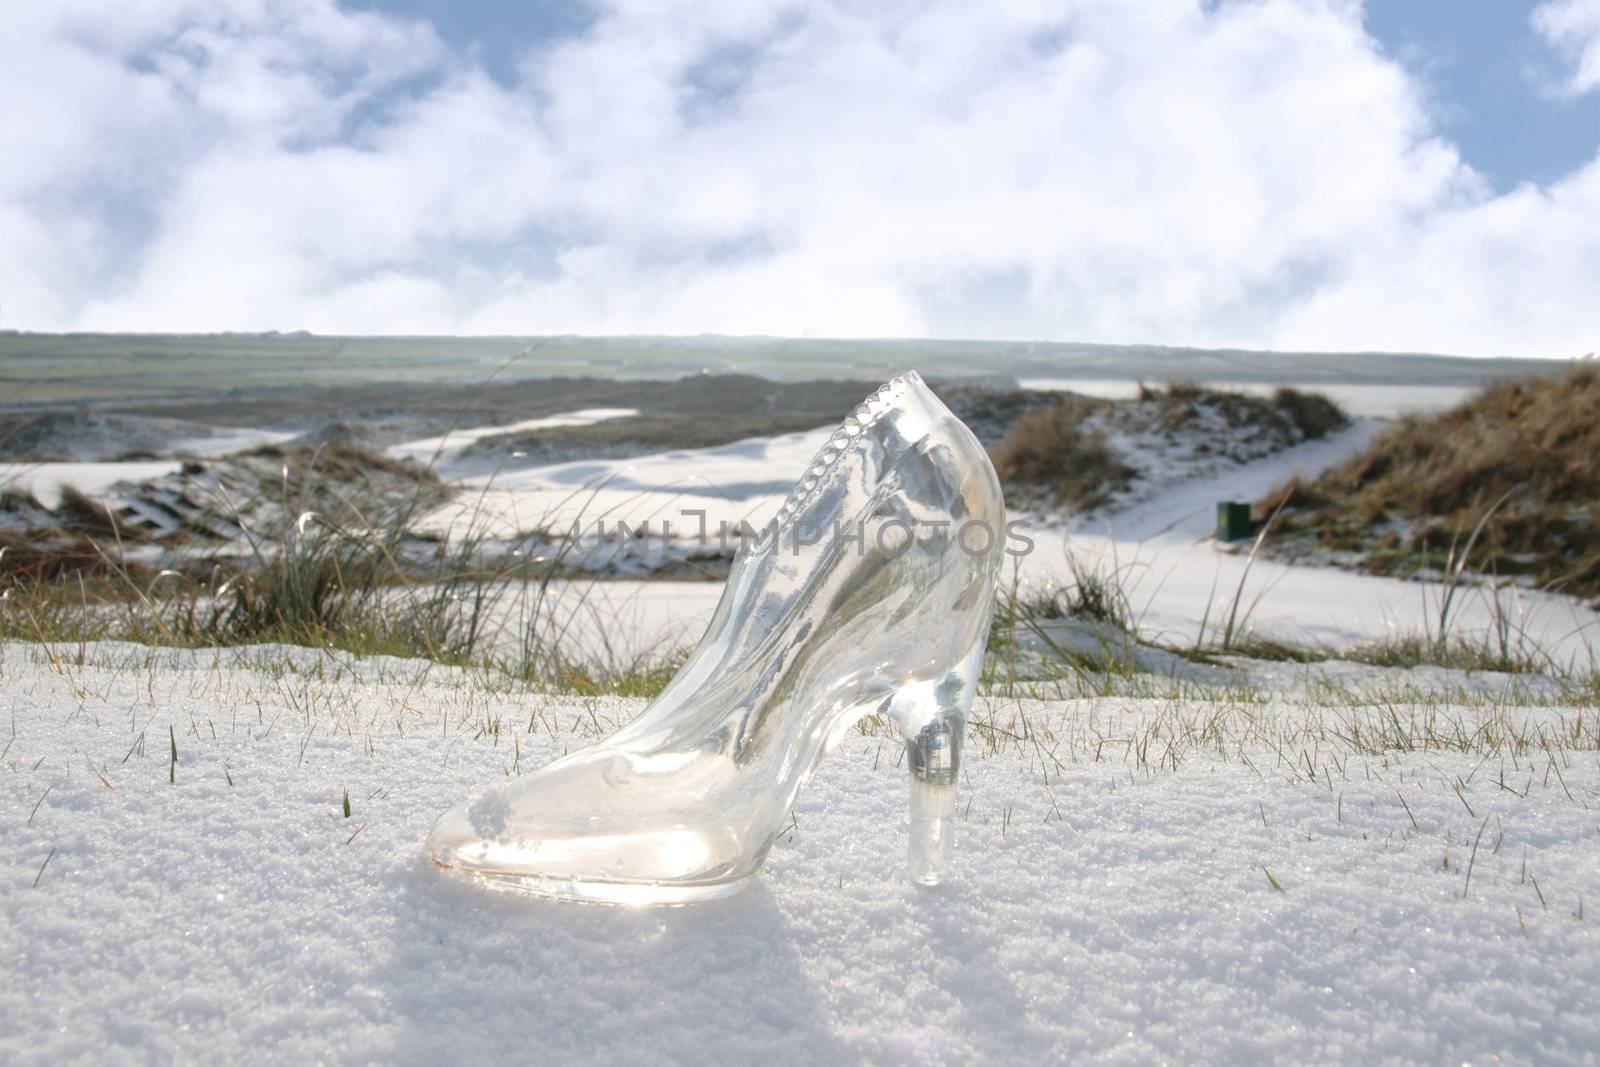 a crystal glass slipper in a snow covered irish golf course for a concept on ladies golf